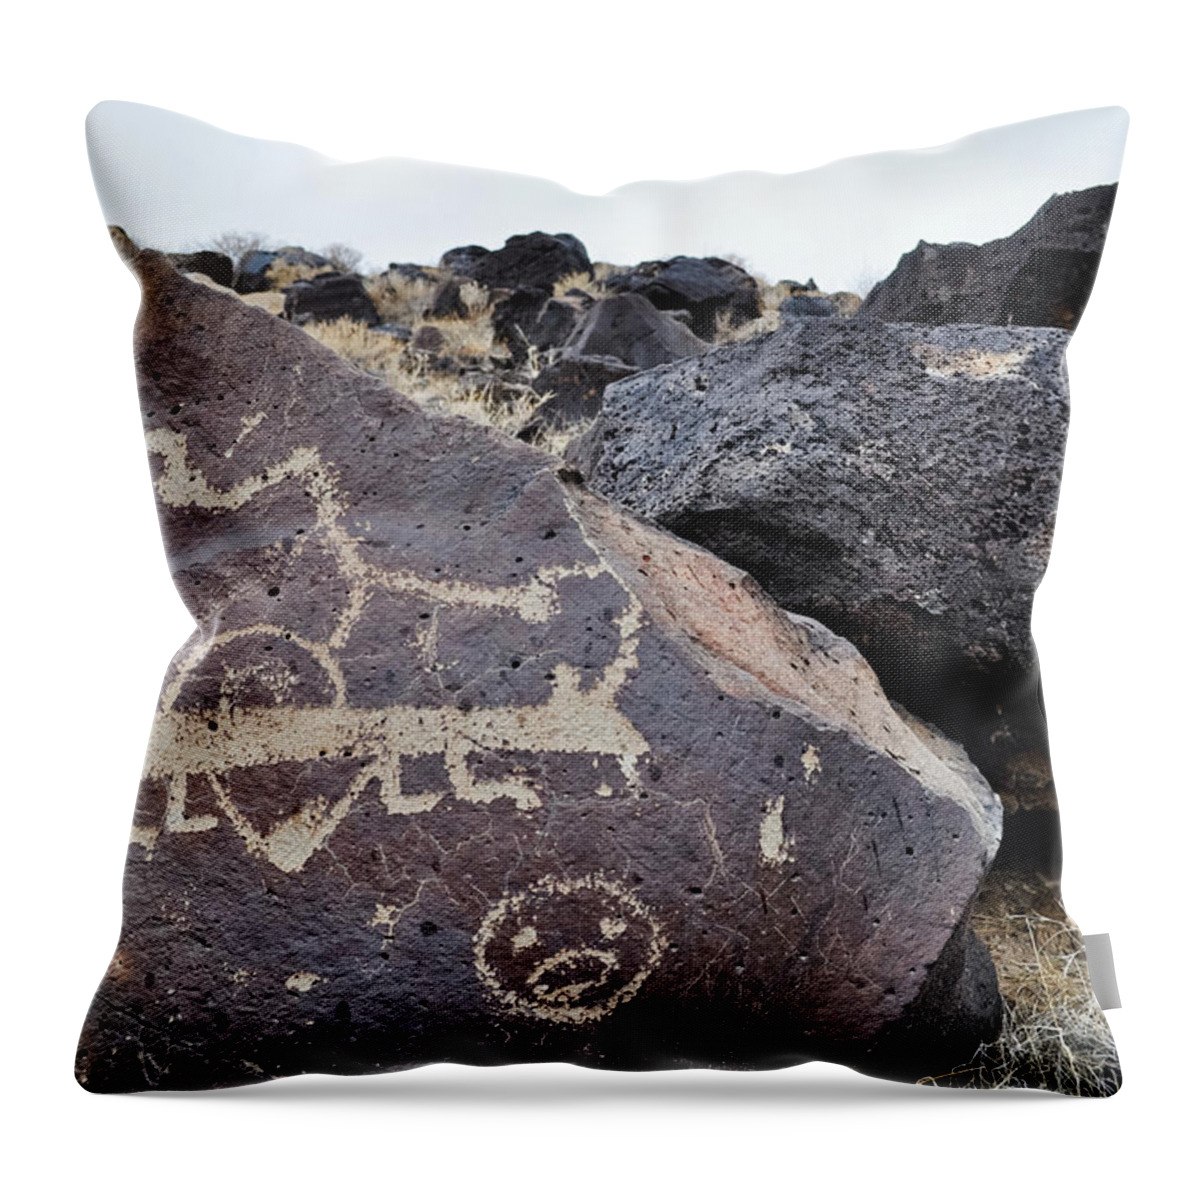 Petroglyph National Monument Throw Pillow featuring the photograph Petroglyph Monument Animal by Kyle Hanson